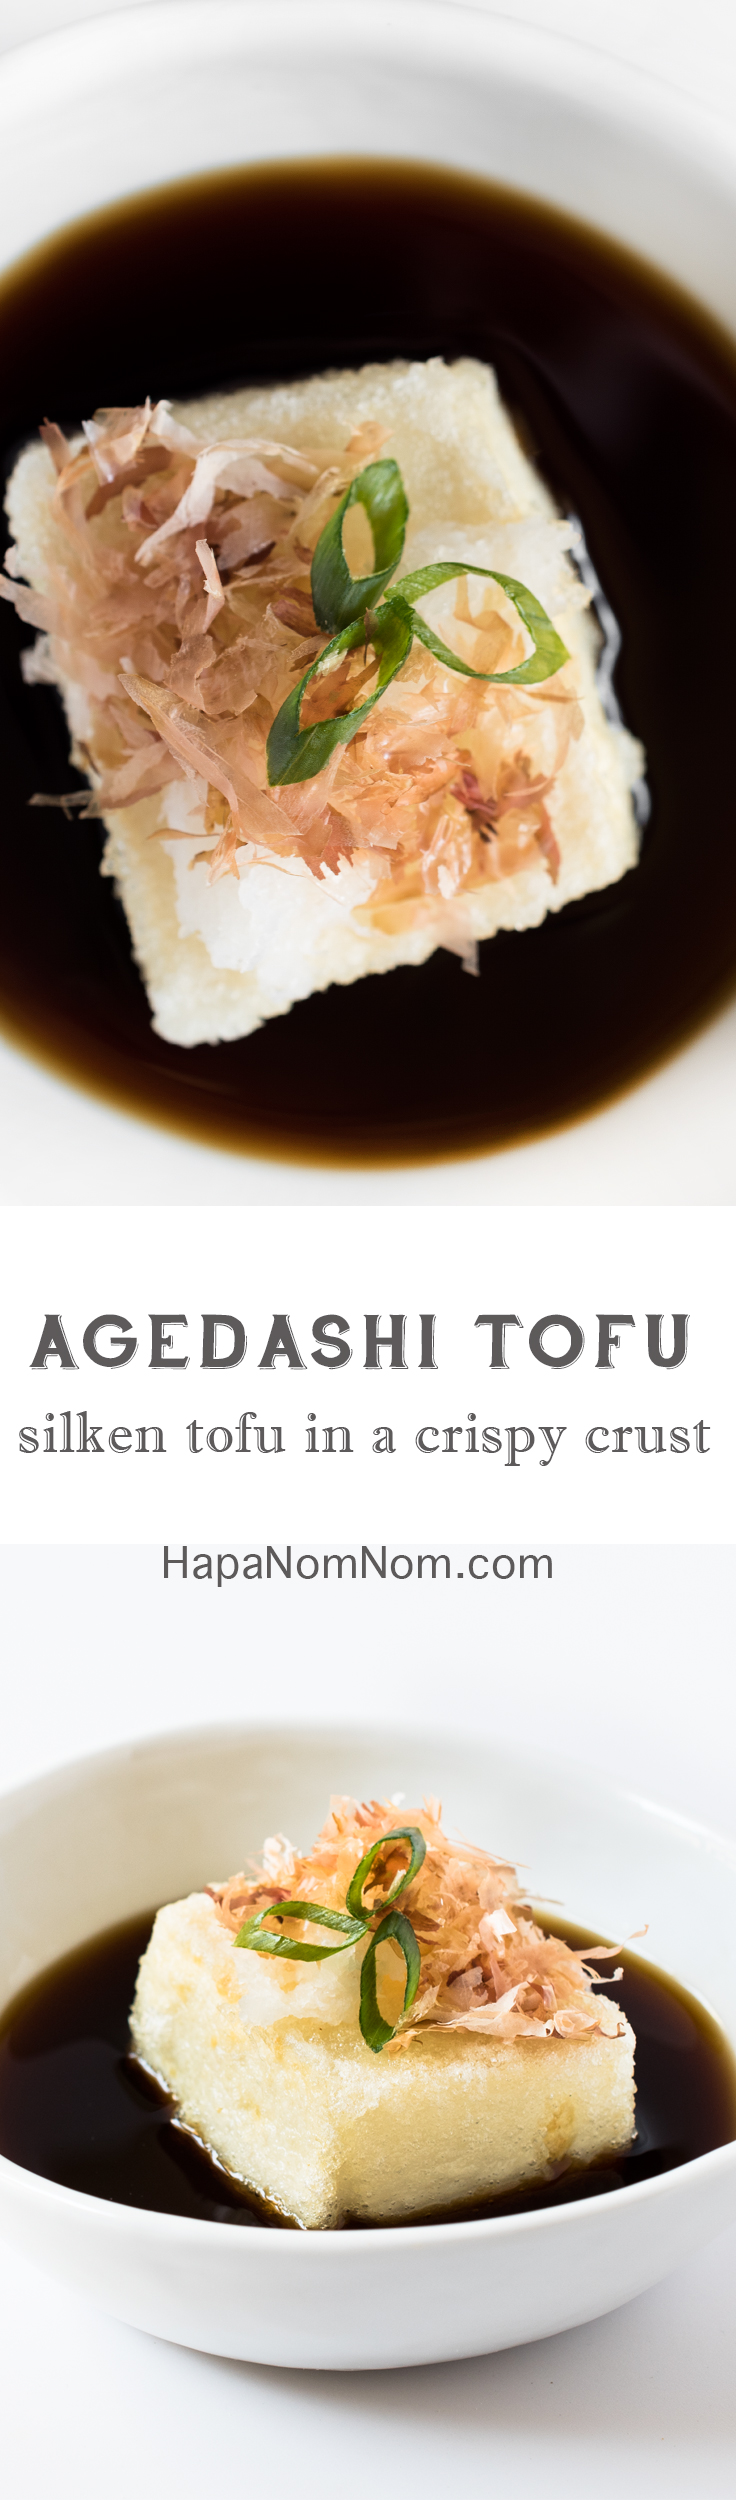 silky tofu encased in a thin, crispy crust and sits in a shallow dashi-based broth. Topped with a little daikon radish, katsuobushi, and sliced scallions -this dish is delicate in flavor and elegant in presentation.